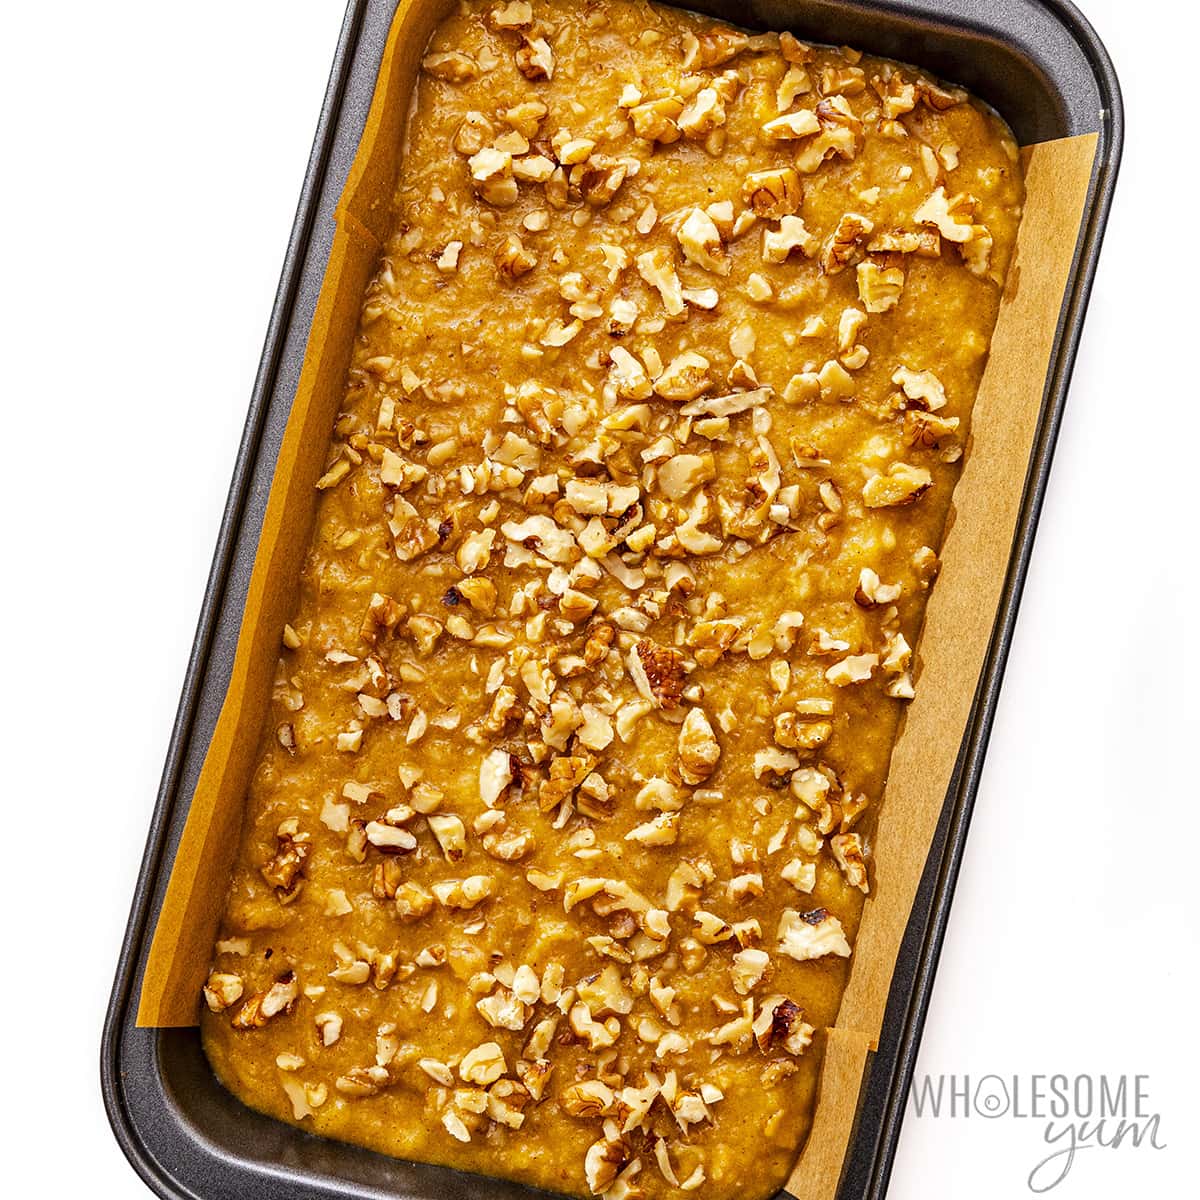 Pour the almond flour banana bread batter into the loaf pan.